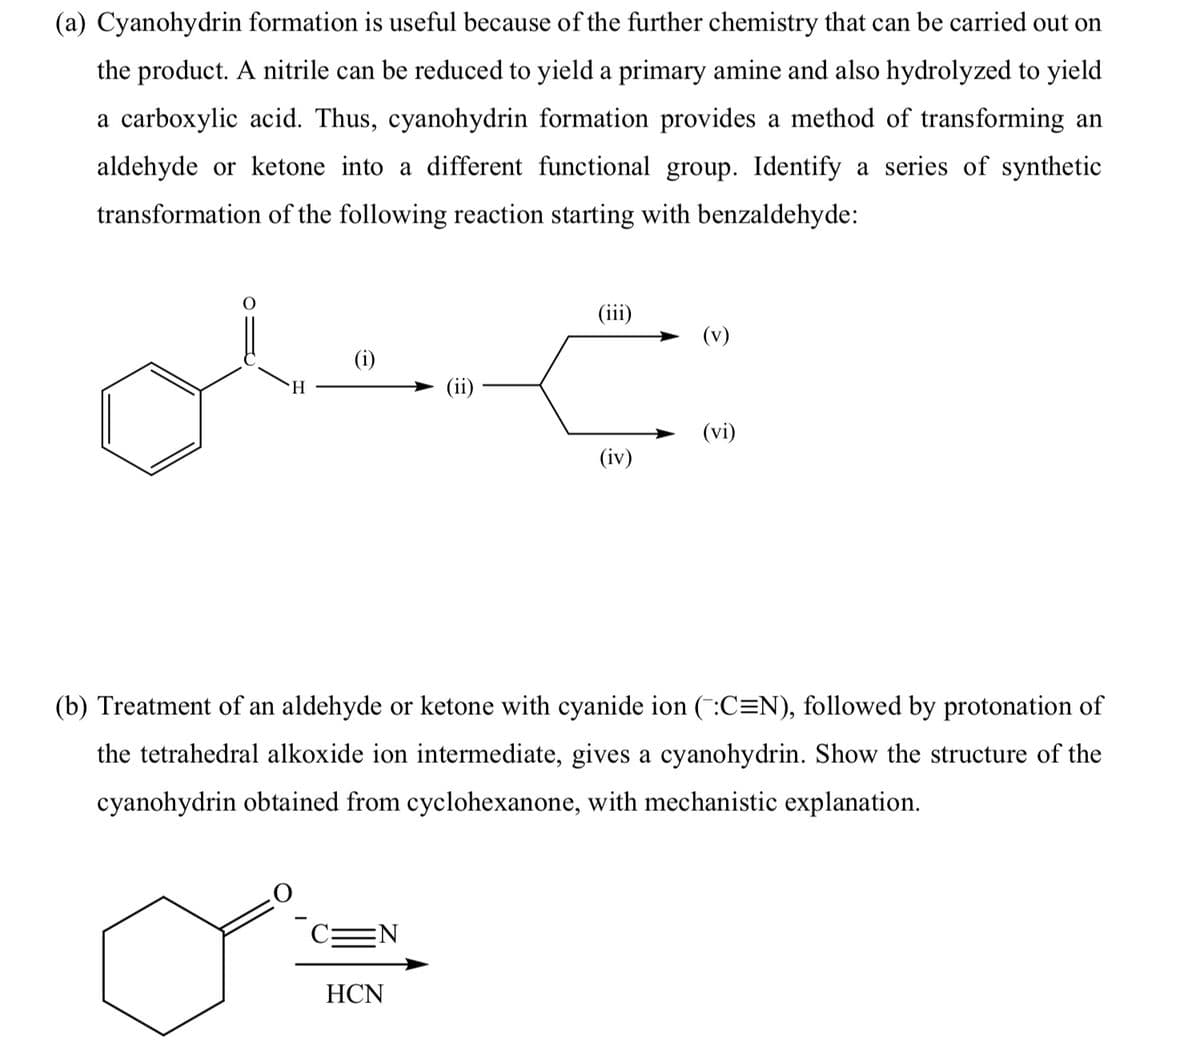 (a) Cyanohydrin formation is useful because of the further chemistry that can be carried out on
the product. A nitrile can be reduced to yield a primary amine and also hydrolyzed to yield
a carboxylic acid. Thus, cyanohydrin formation provides a method of transforming an
aldehyde or ketone into a different functional group. Identify a series of synthetic
transformation of the following reaction starting with benzaldehyde:
(iii)
(v)
(i)
H.
(vi)
(iv)
(b) Treatment of an aldehyde or ketone with cyanide ion (:C=N), followed by protonation of
the tetrahedral alkoxide ion intermediate, gives a cyanohydrin. Show the structure of the
cyanohydrin obtained from cyclohexanone, with mechanistic explanation.
HCN
